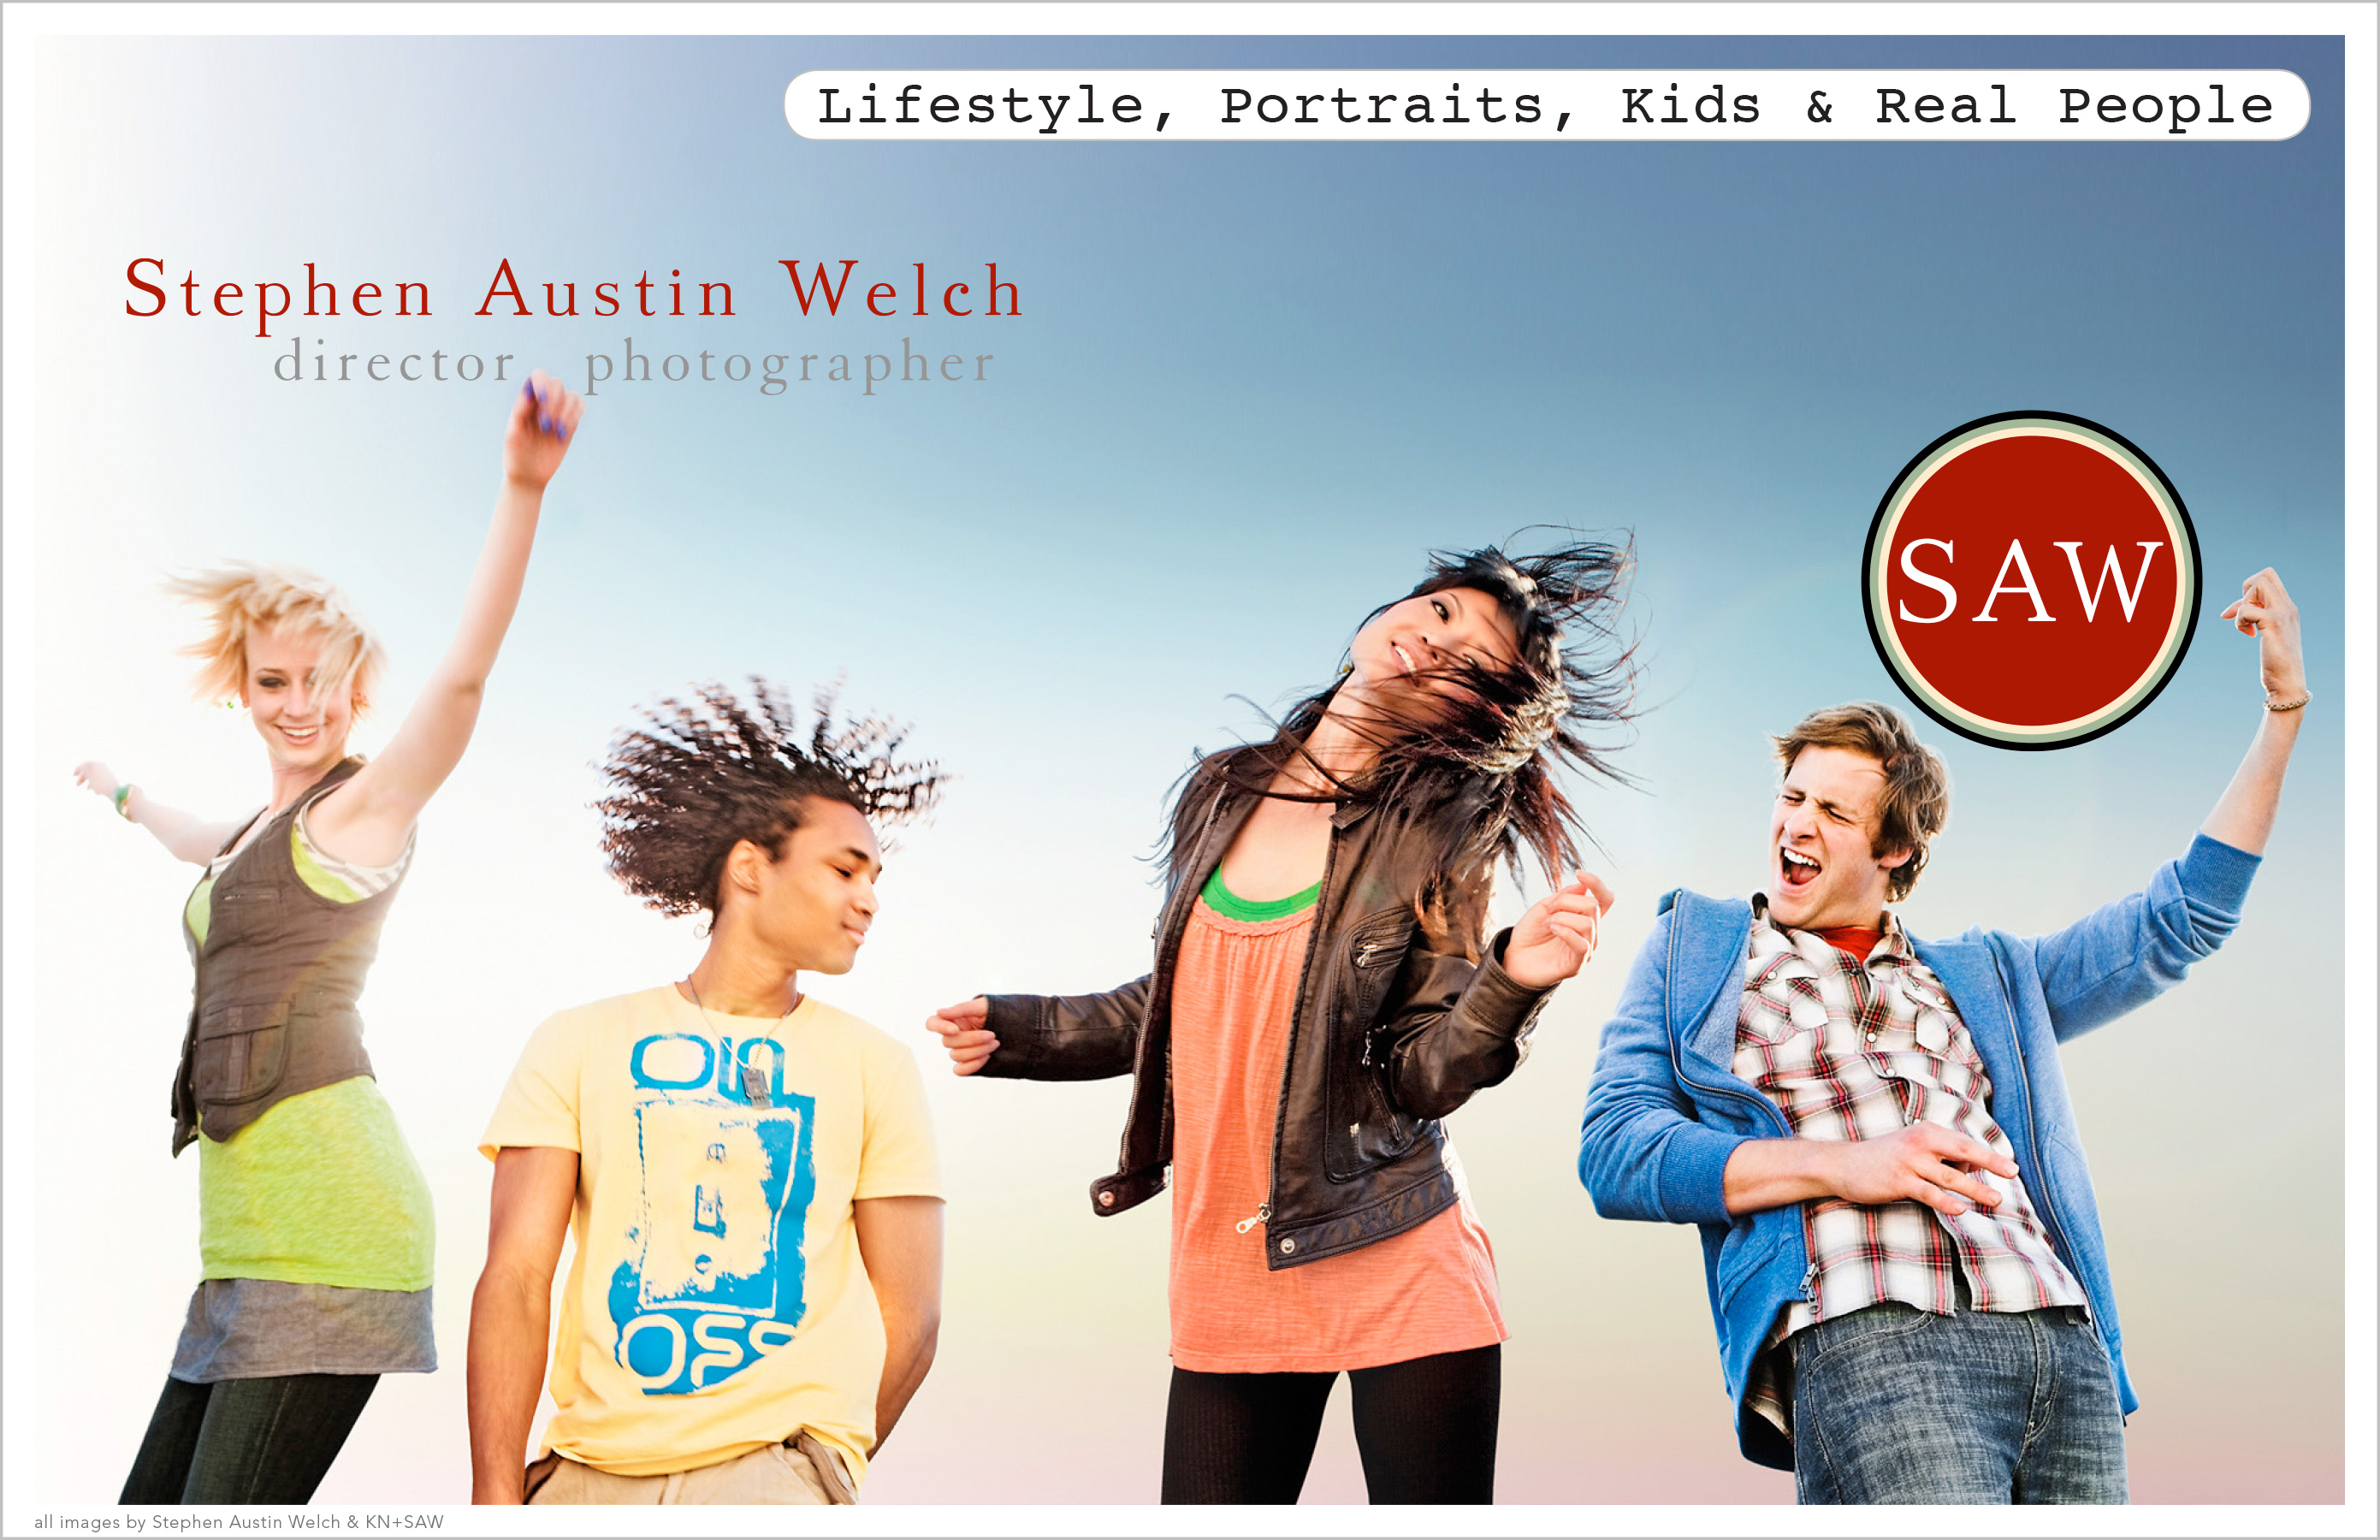 overview-lifestyle-portraits-kids-real-people-001-knsaw-stephen-austin-welch-director-photographer